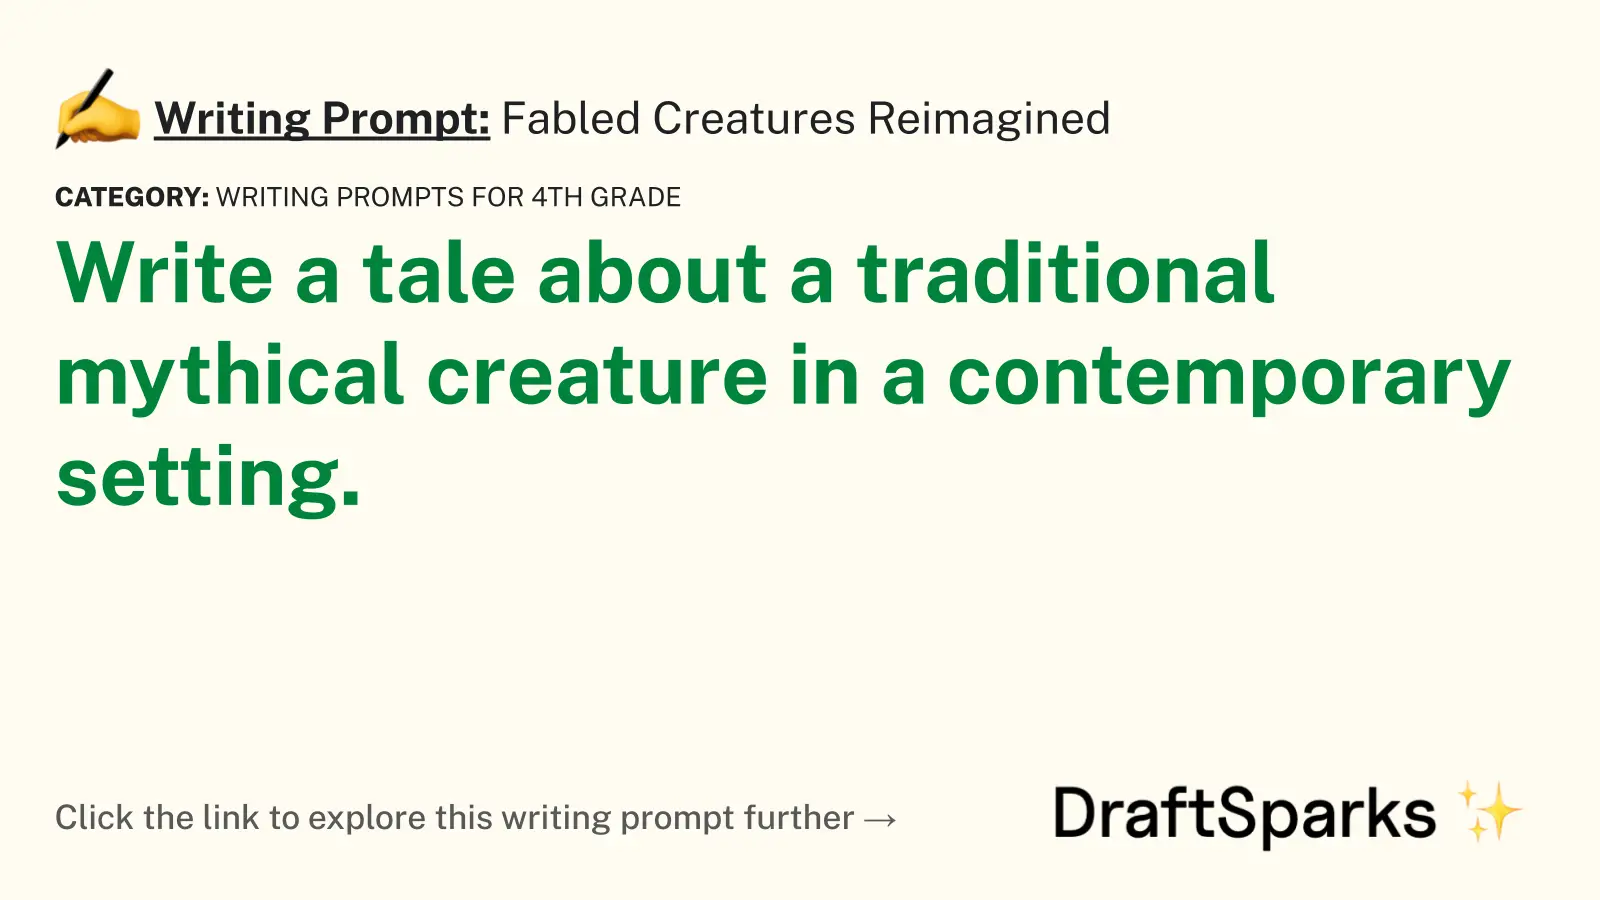 Fabled Creatures Reimagined